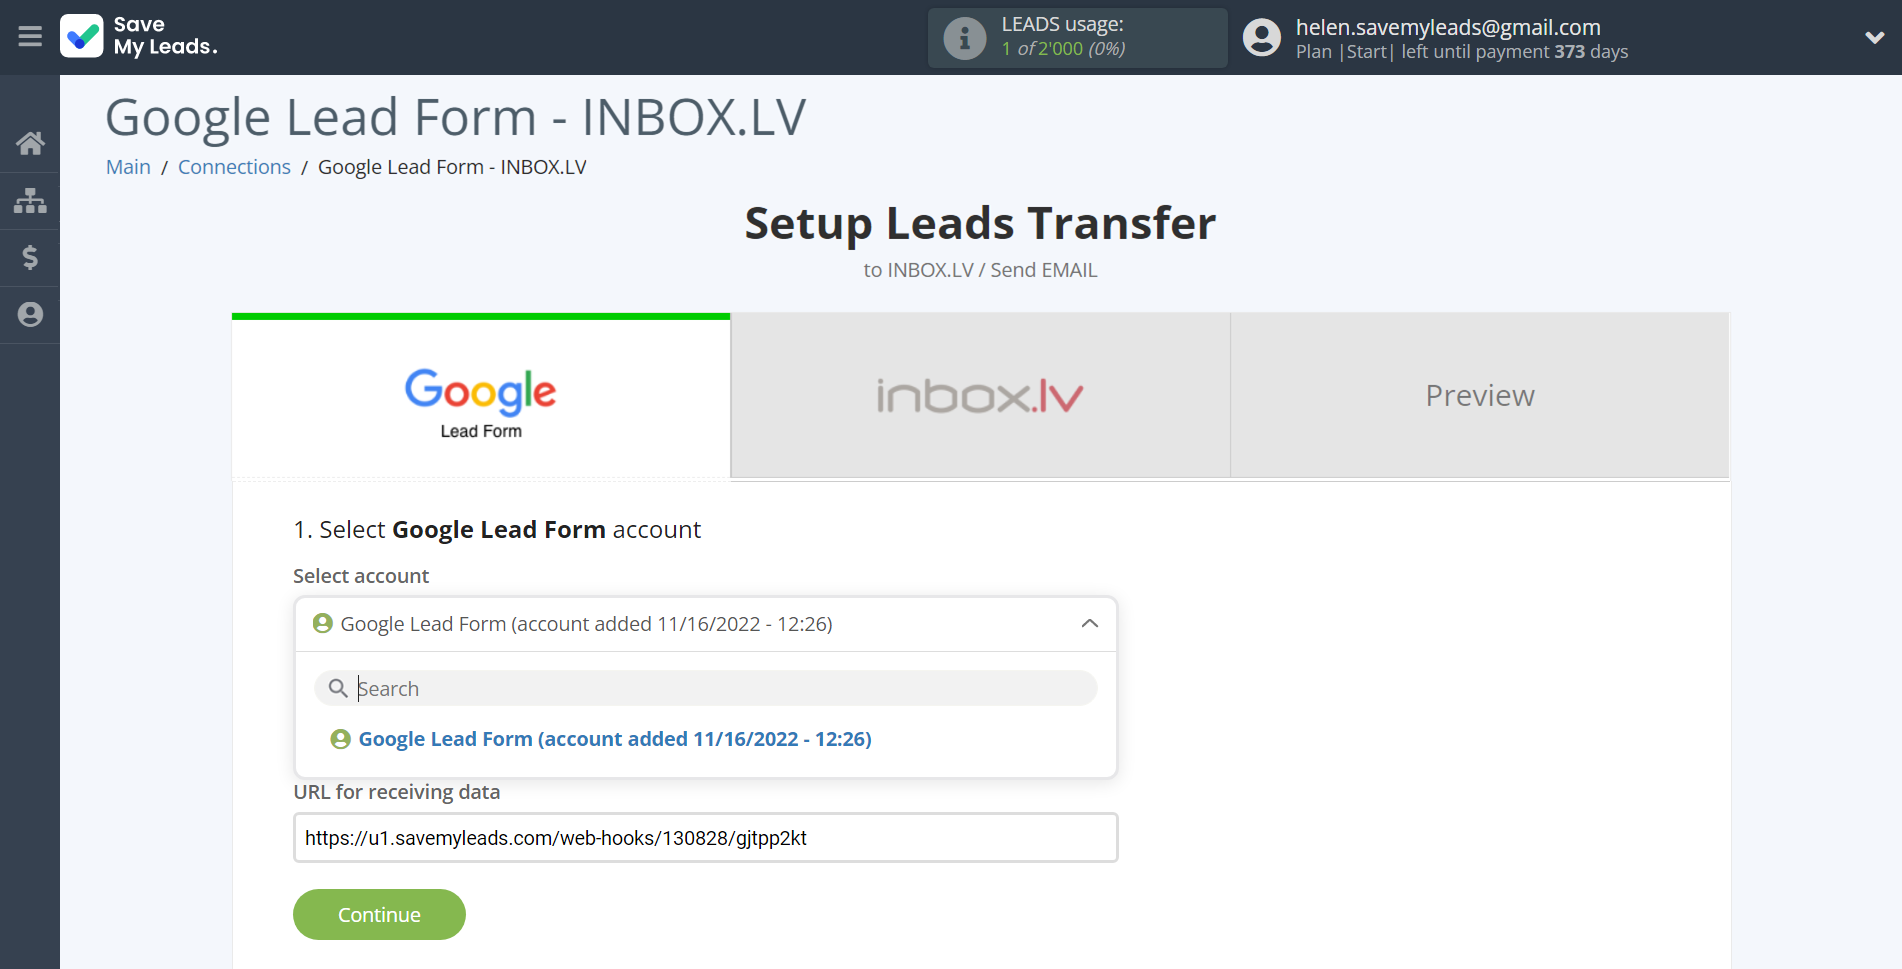 How to Connect Google Lead Form with INBOX.LV | Data Source account selection